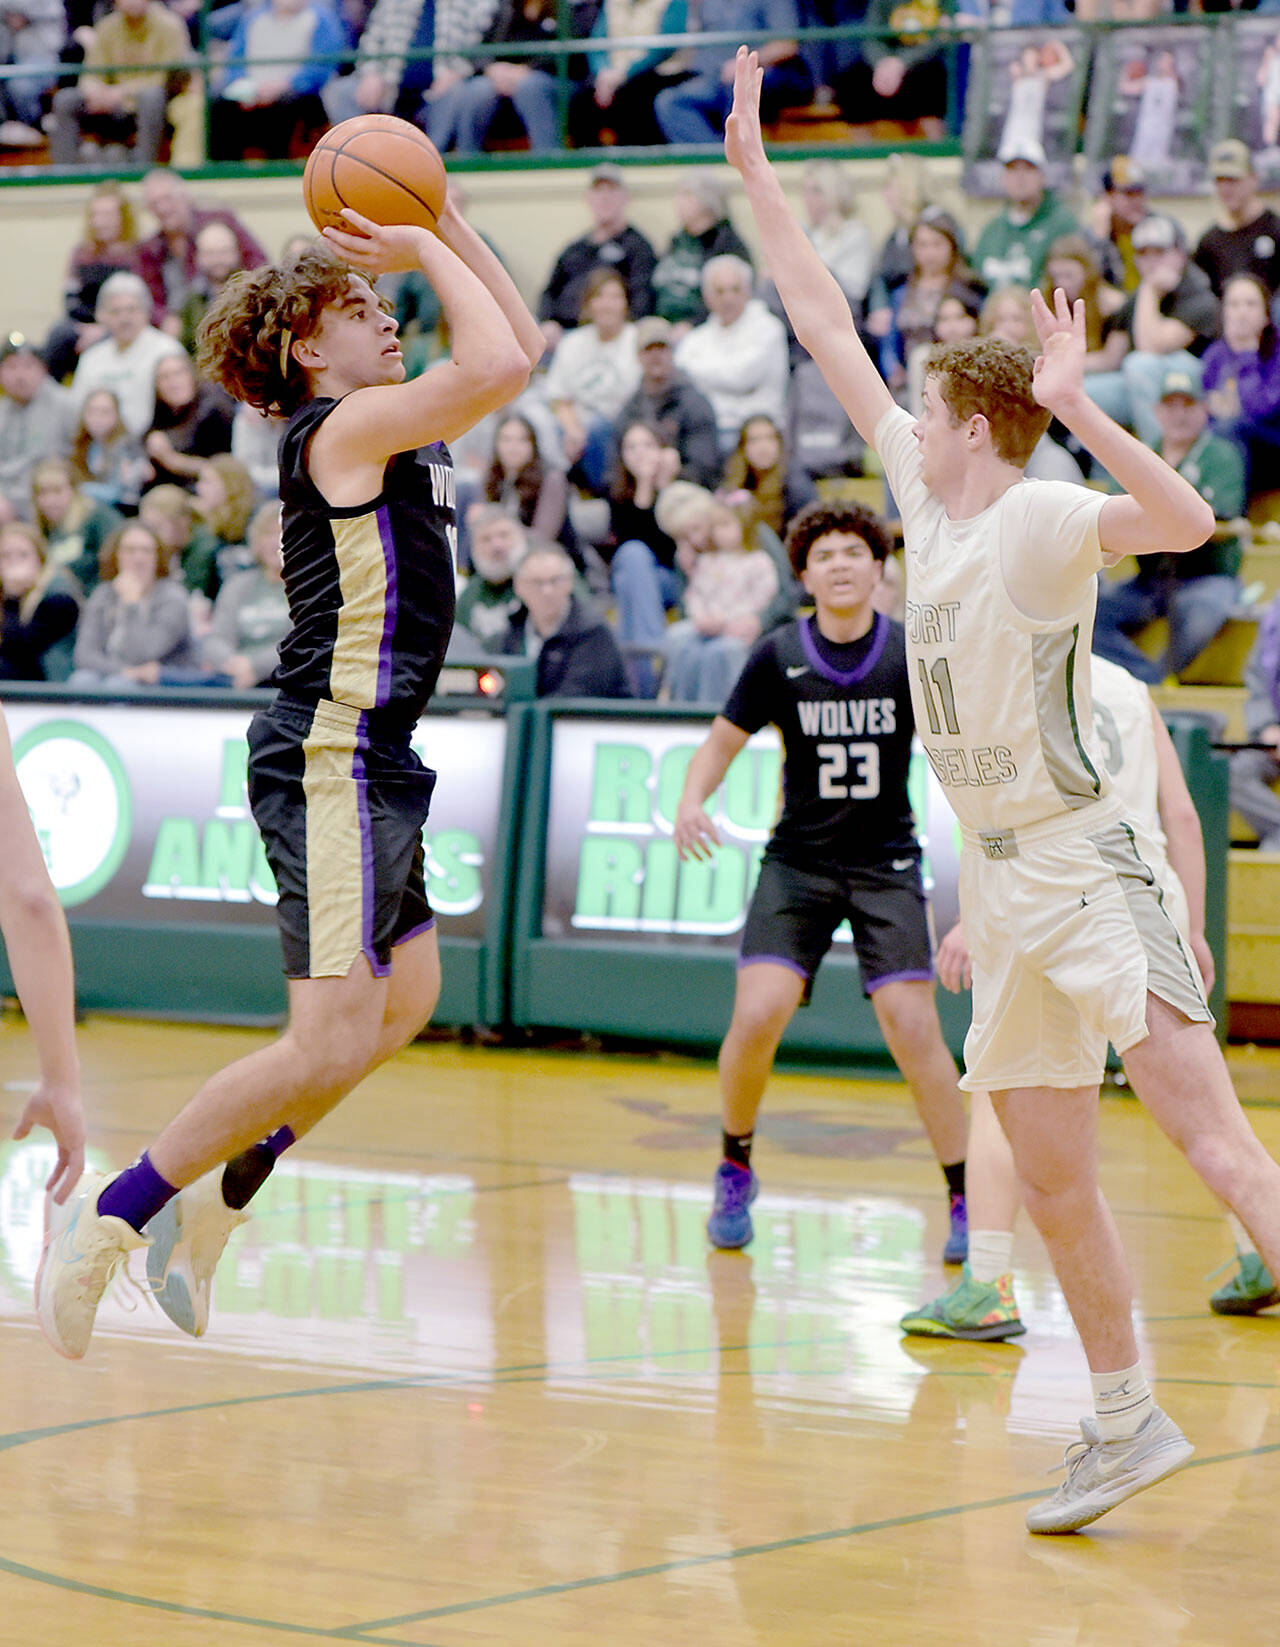 KEITH THORPE/PENINSULA DAILY NEWS Sequim’s Lars Wiker, left, takes aim at the rim as Port Angeles’ Dallas Dunning, right, tries to block on Tuesday in Port Angeles.